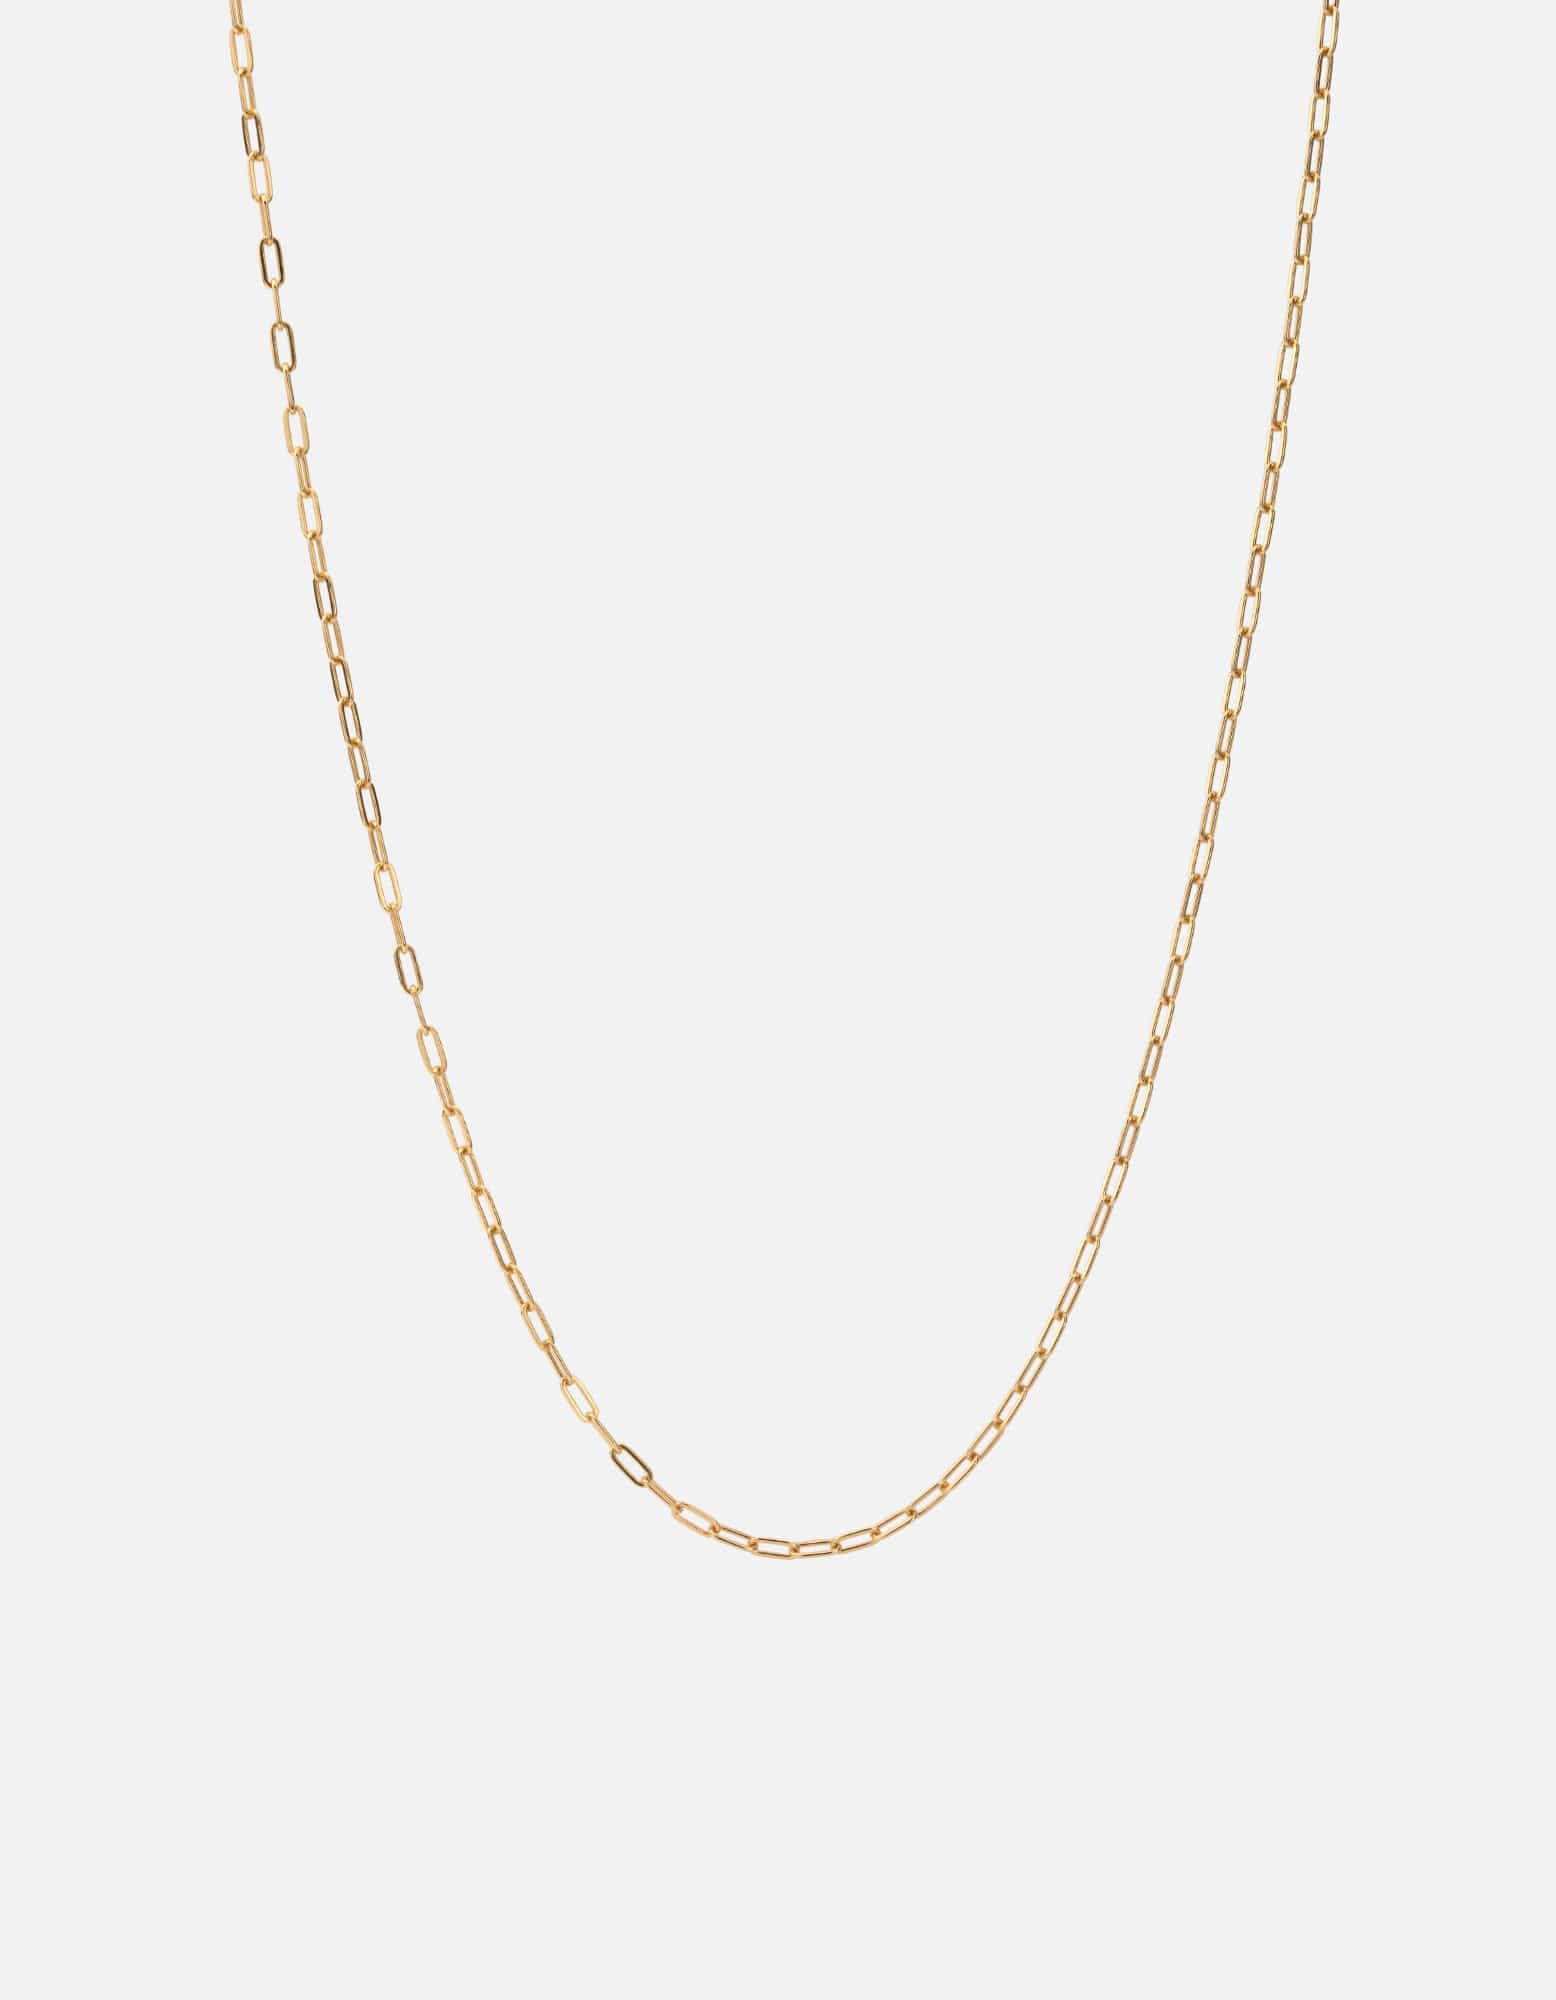 Miansai Women's 2.5mm Volt Link Cable Chain Necklace, Gold, Size 18 in.